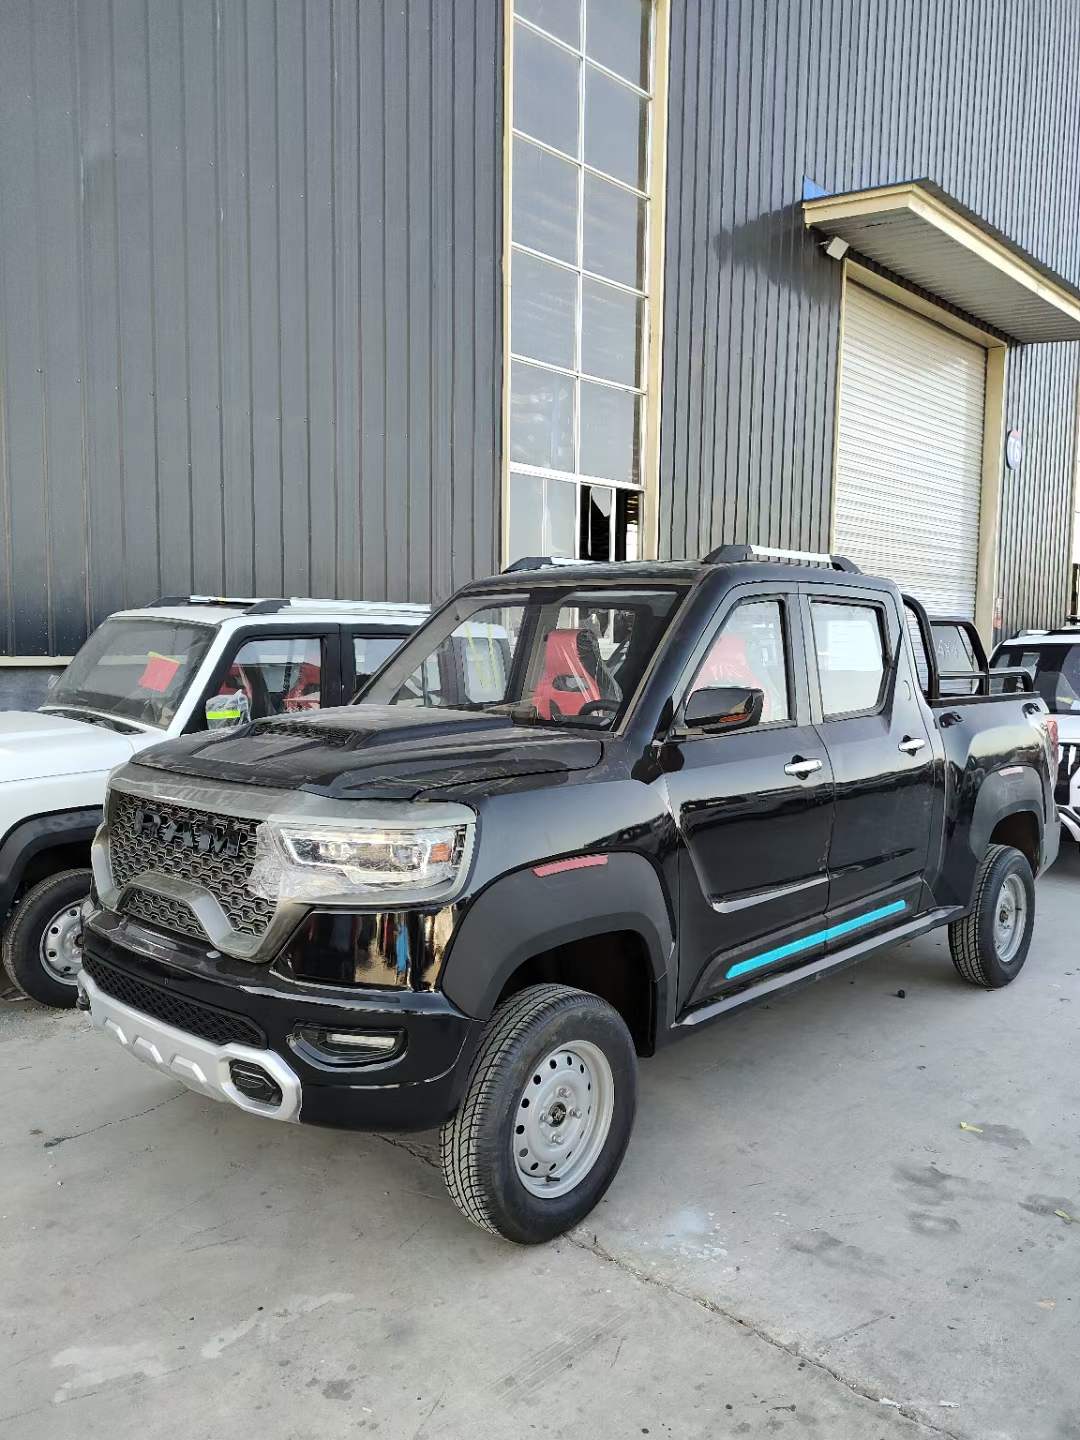 Powerful electric pickup truck